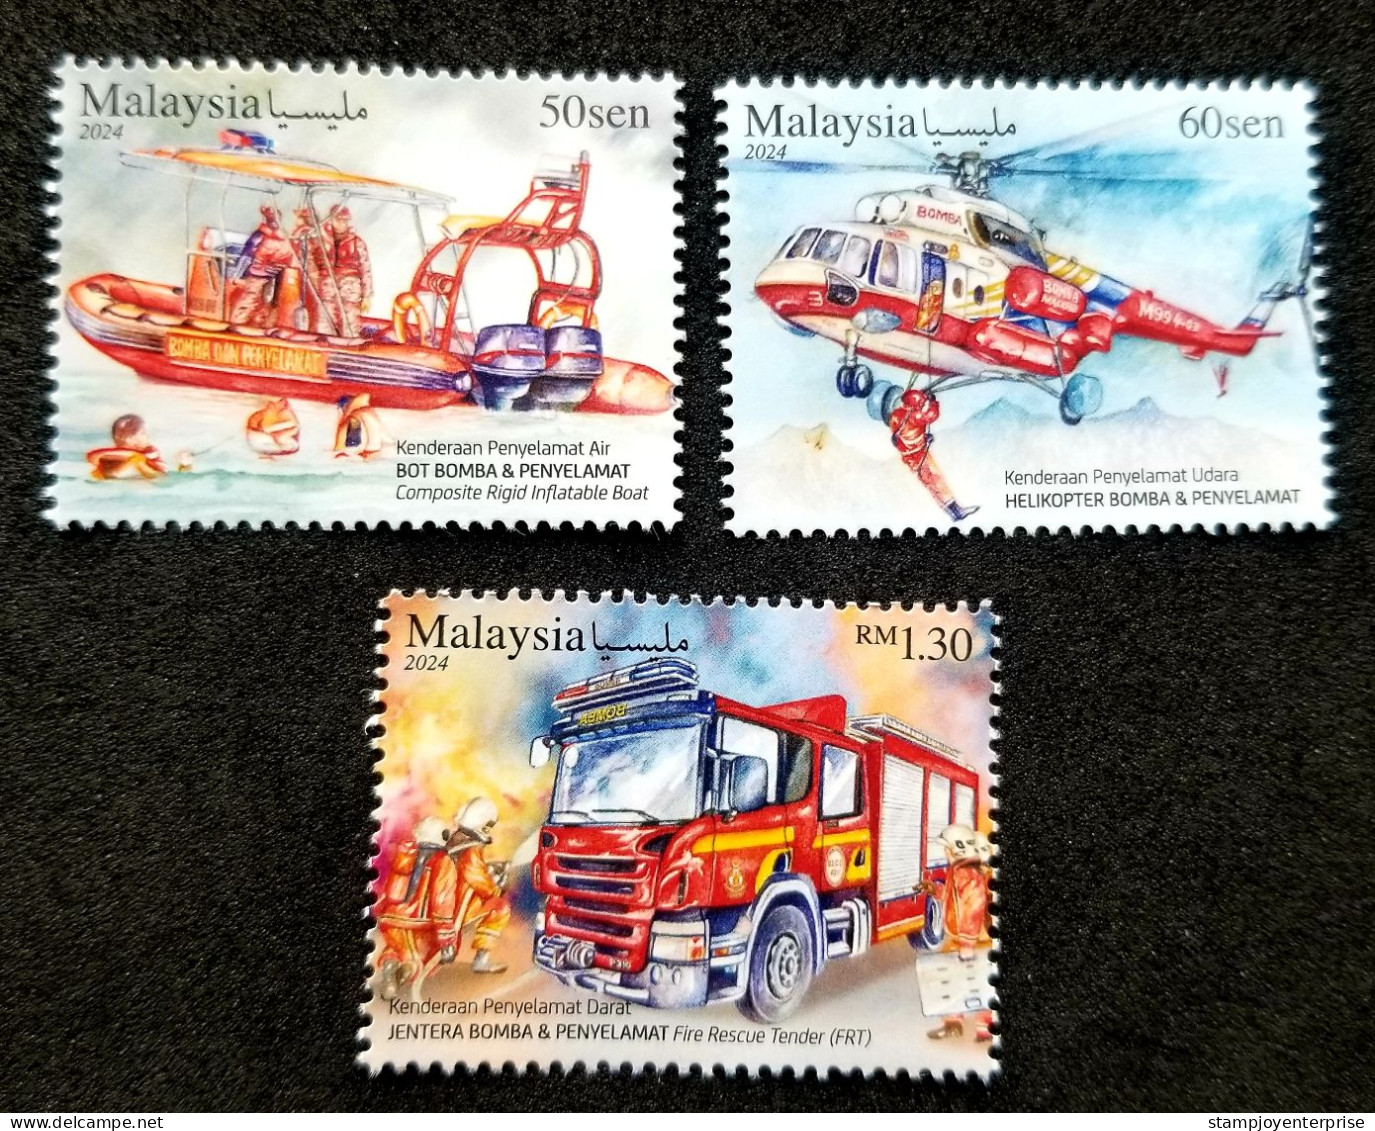 Malaysia Rescue Vehicle 2024 Helicopter Fire Engine Brigade Boat Ship Transport Firefighting Fireman (stamp) MNH - Malaysia (1964-...)